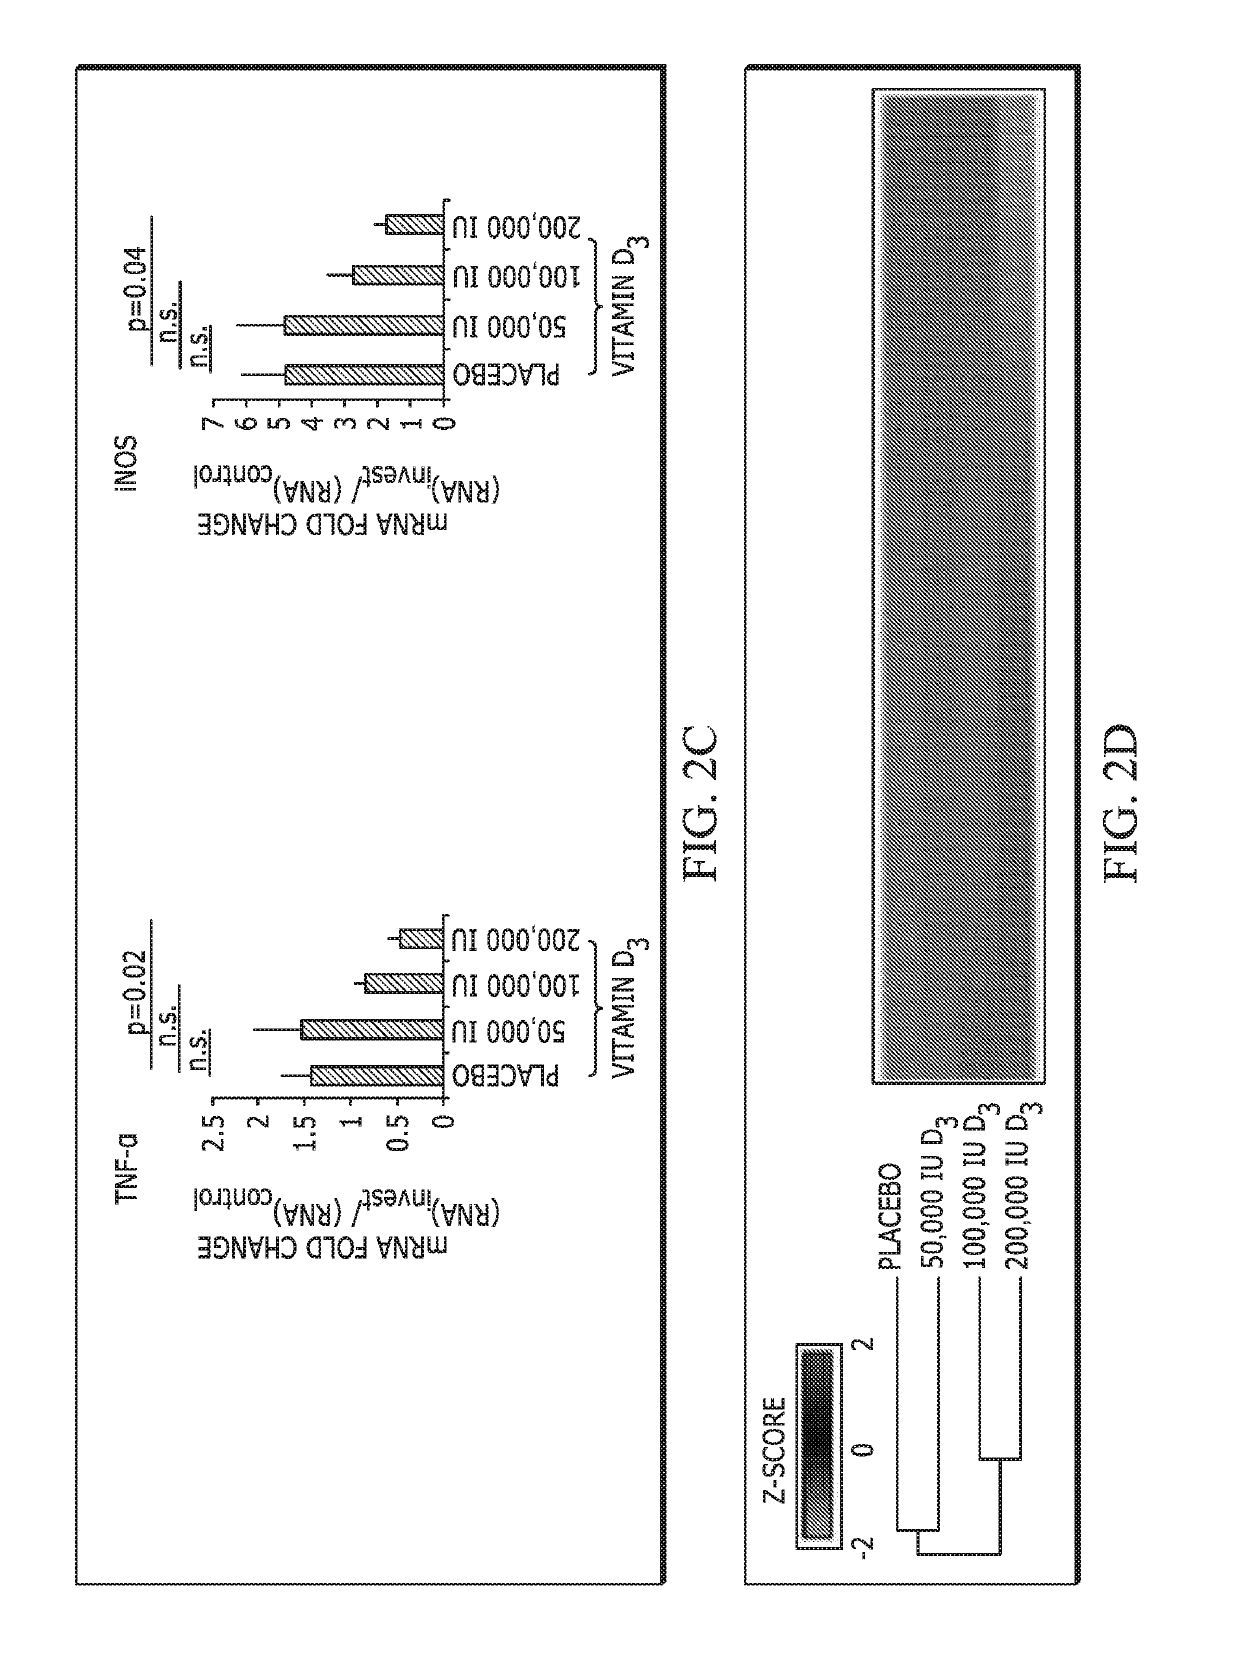 Autophagy activators for treating or preventing skin injury